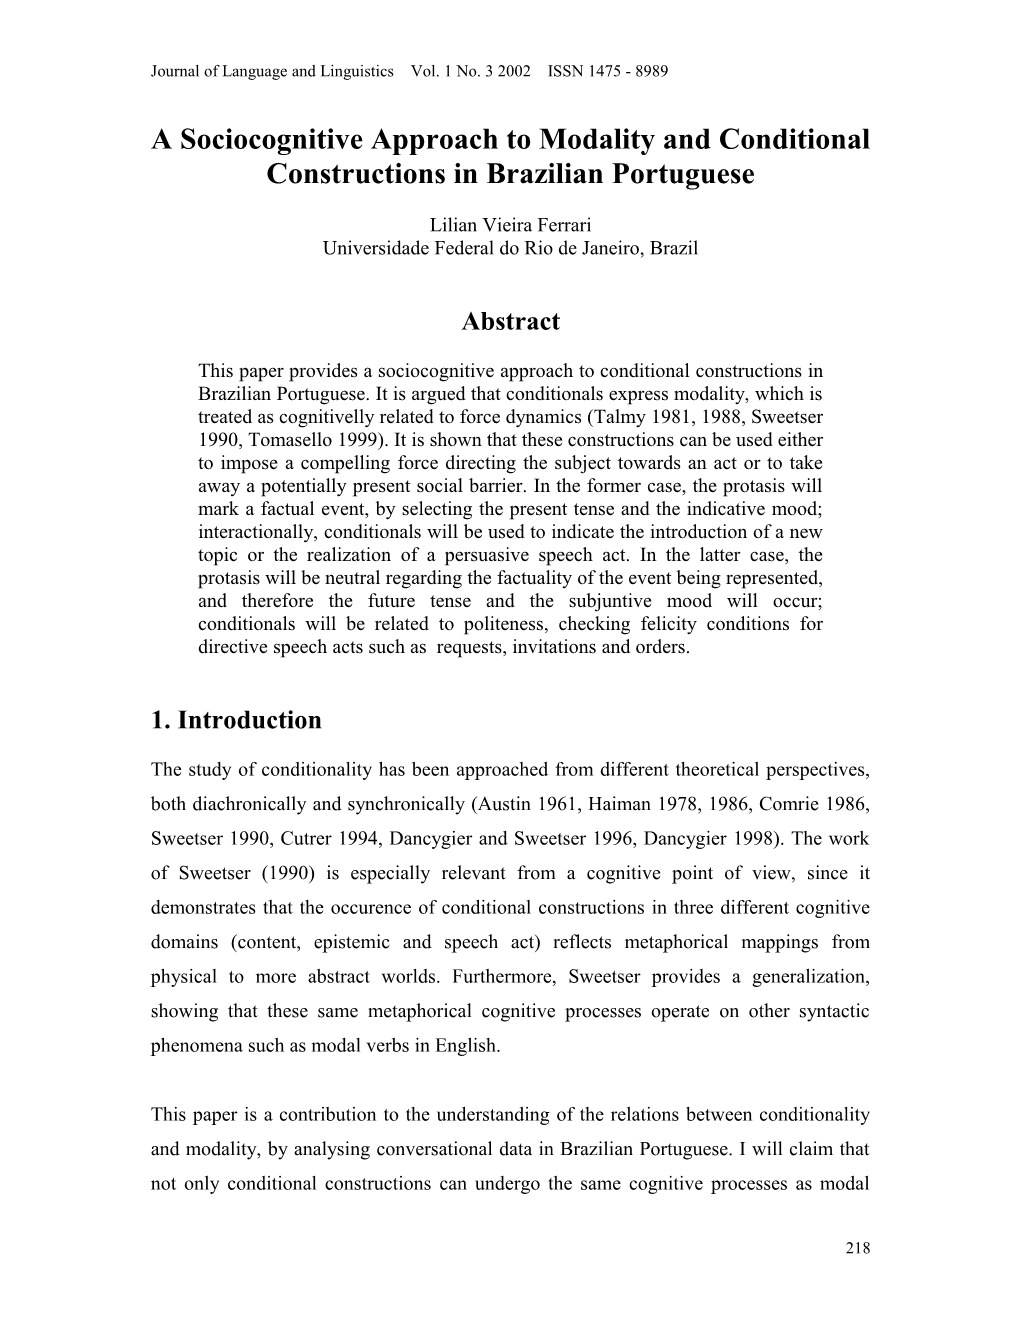 A Sociocognitive Approach to Modality and Conditional Constructions in Brazilian Portuguese